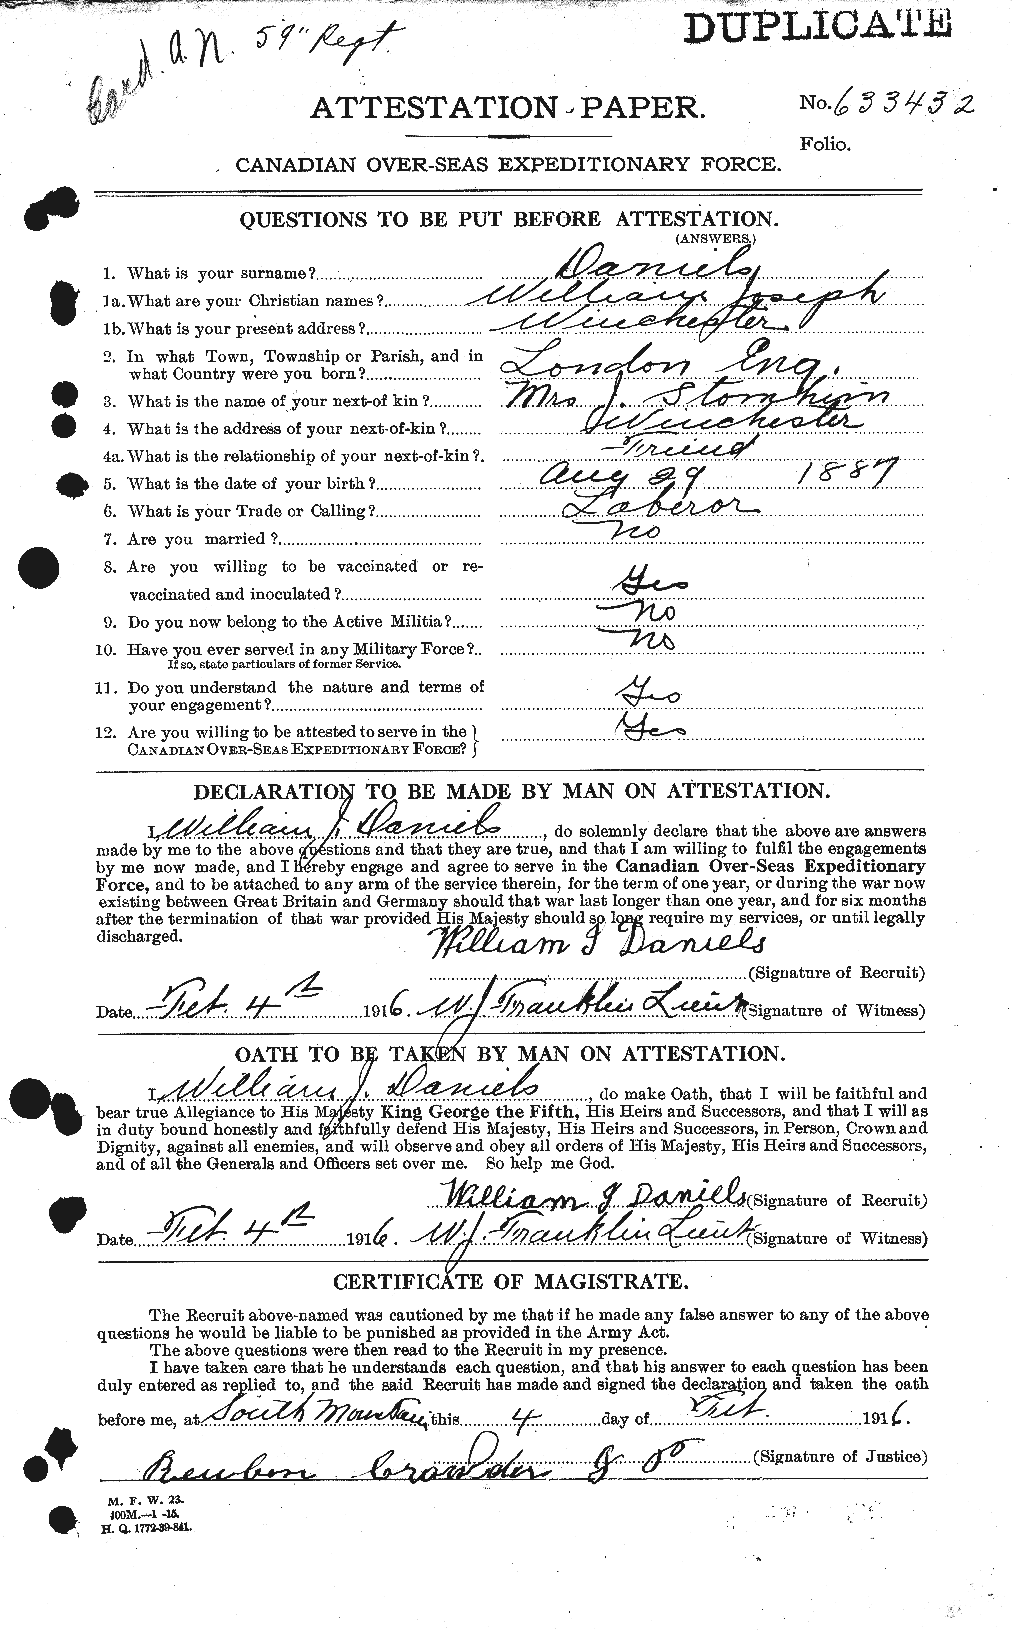 Personnel Records of the First World War - CEF 279703a